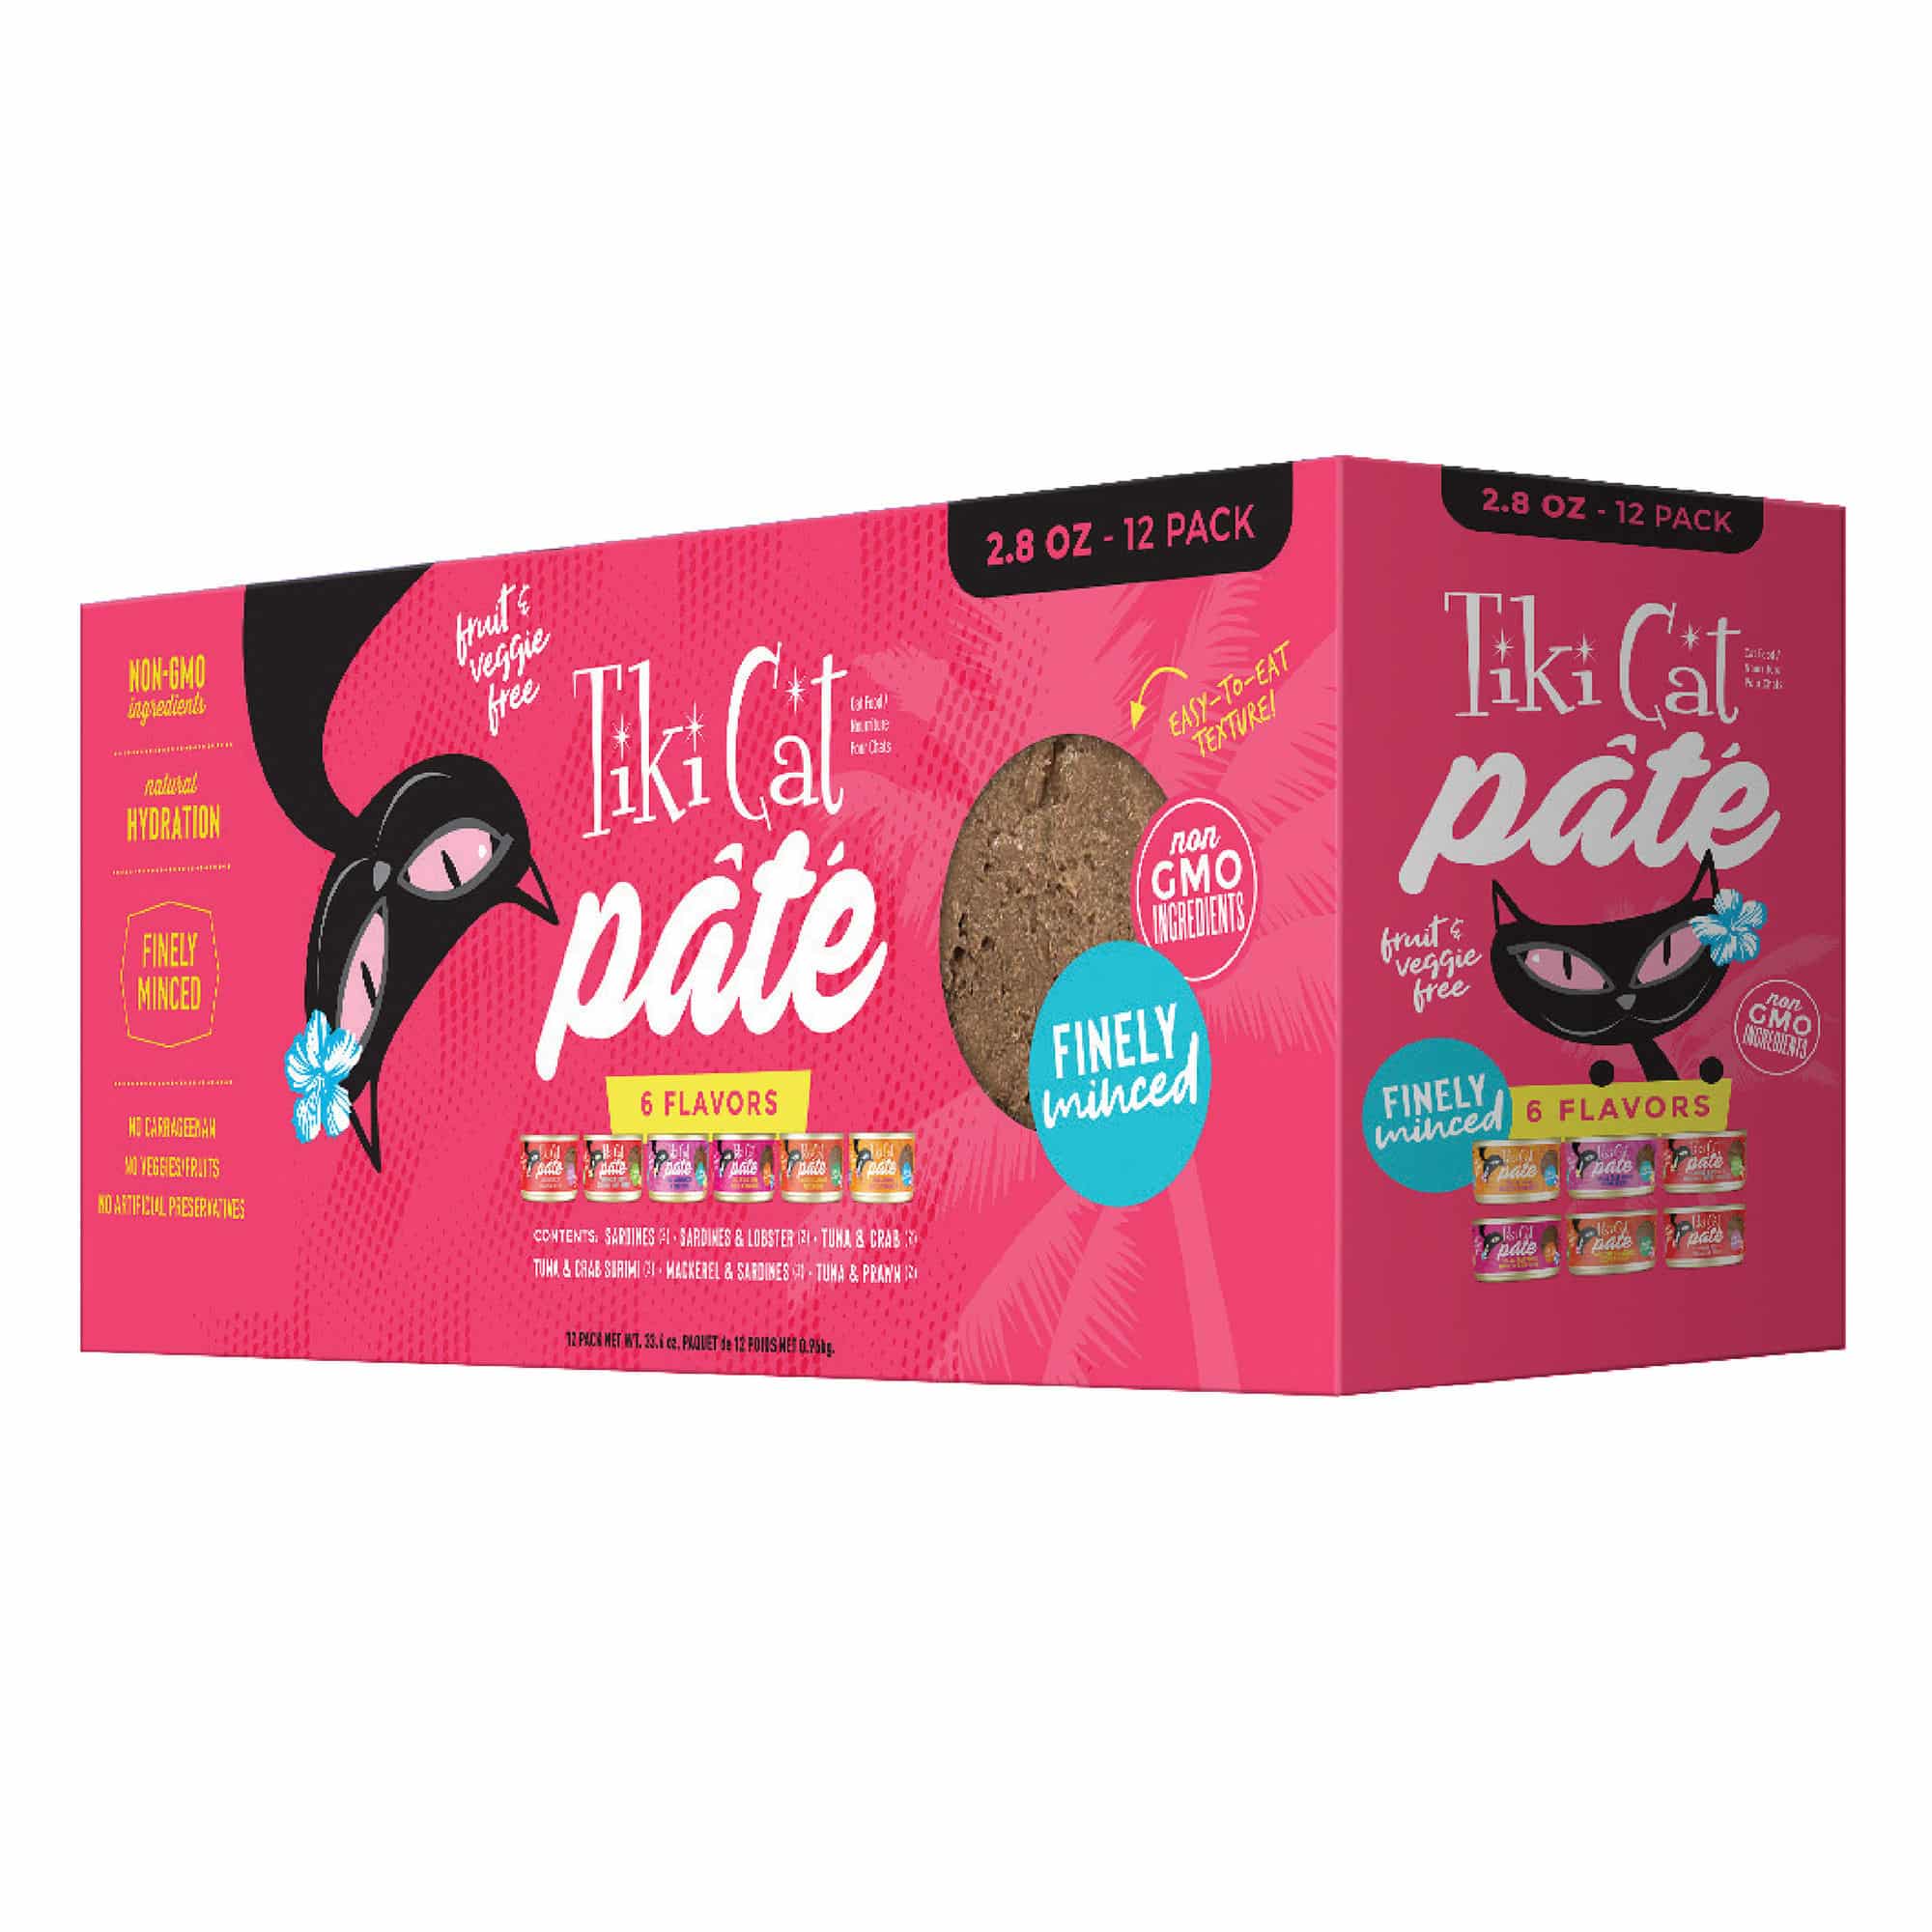 Tiki Cat Grill Pate Variety Pack Wet Food, 2.8 oz., Count of 12